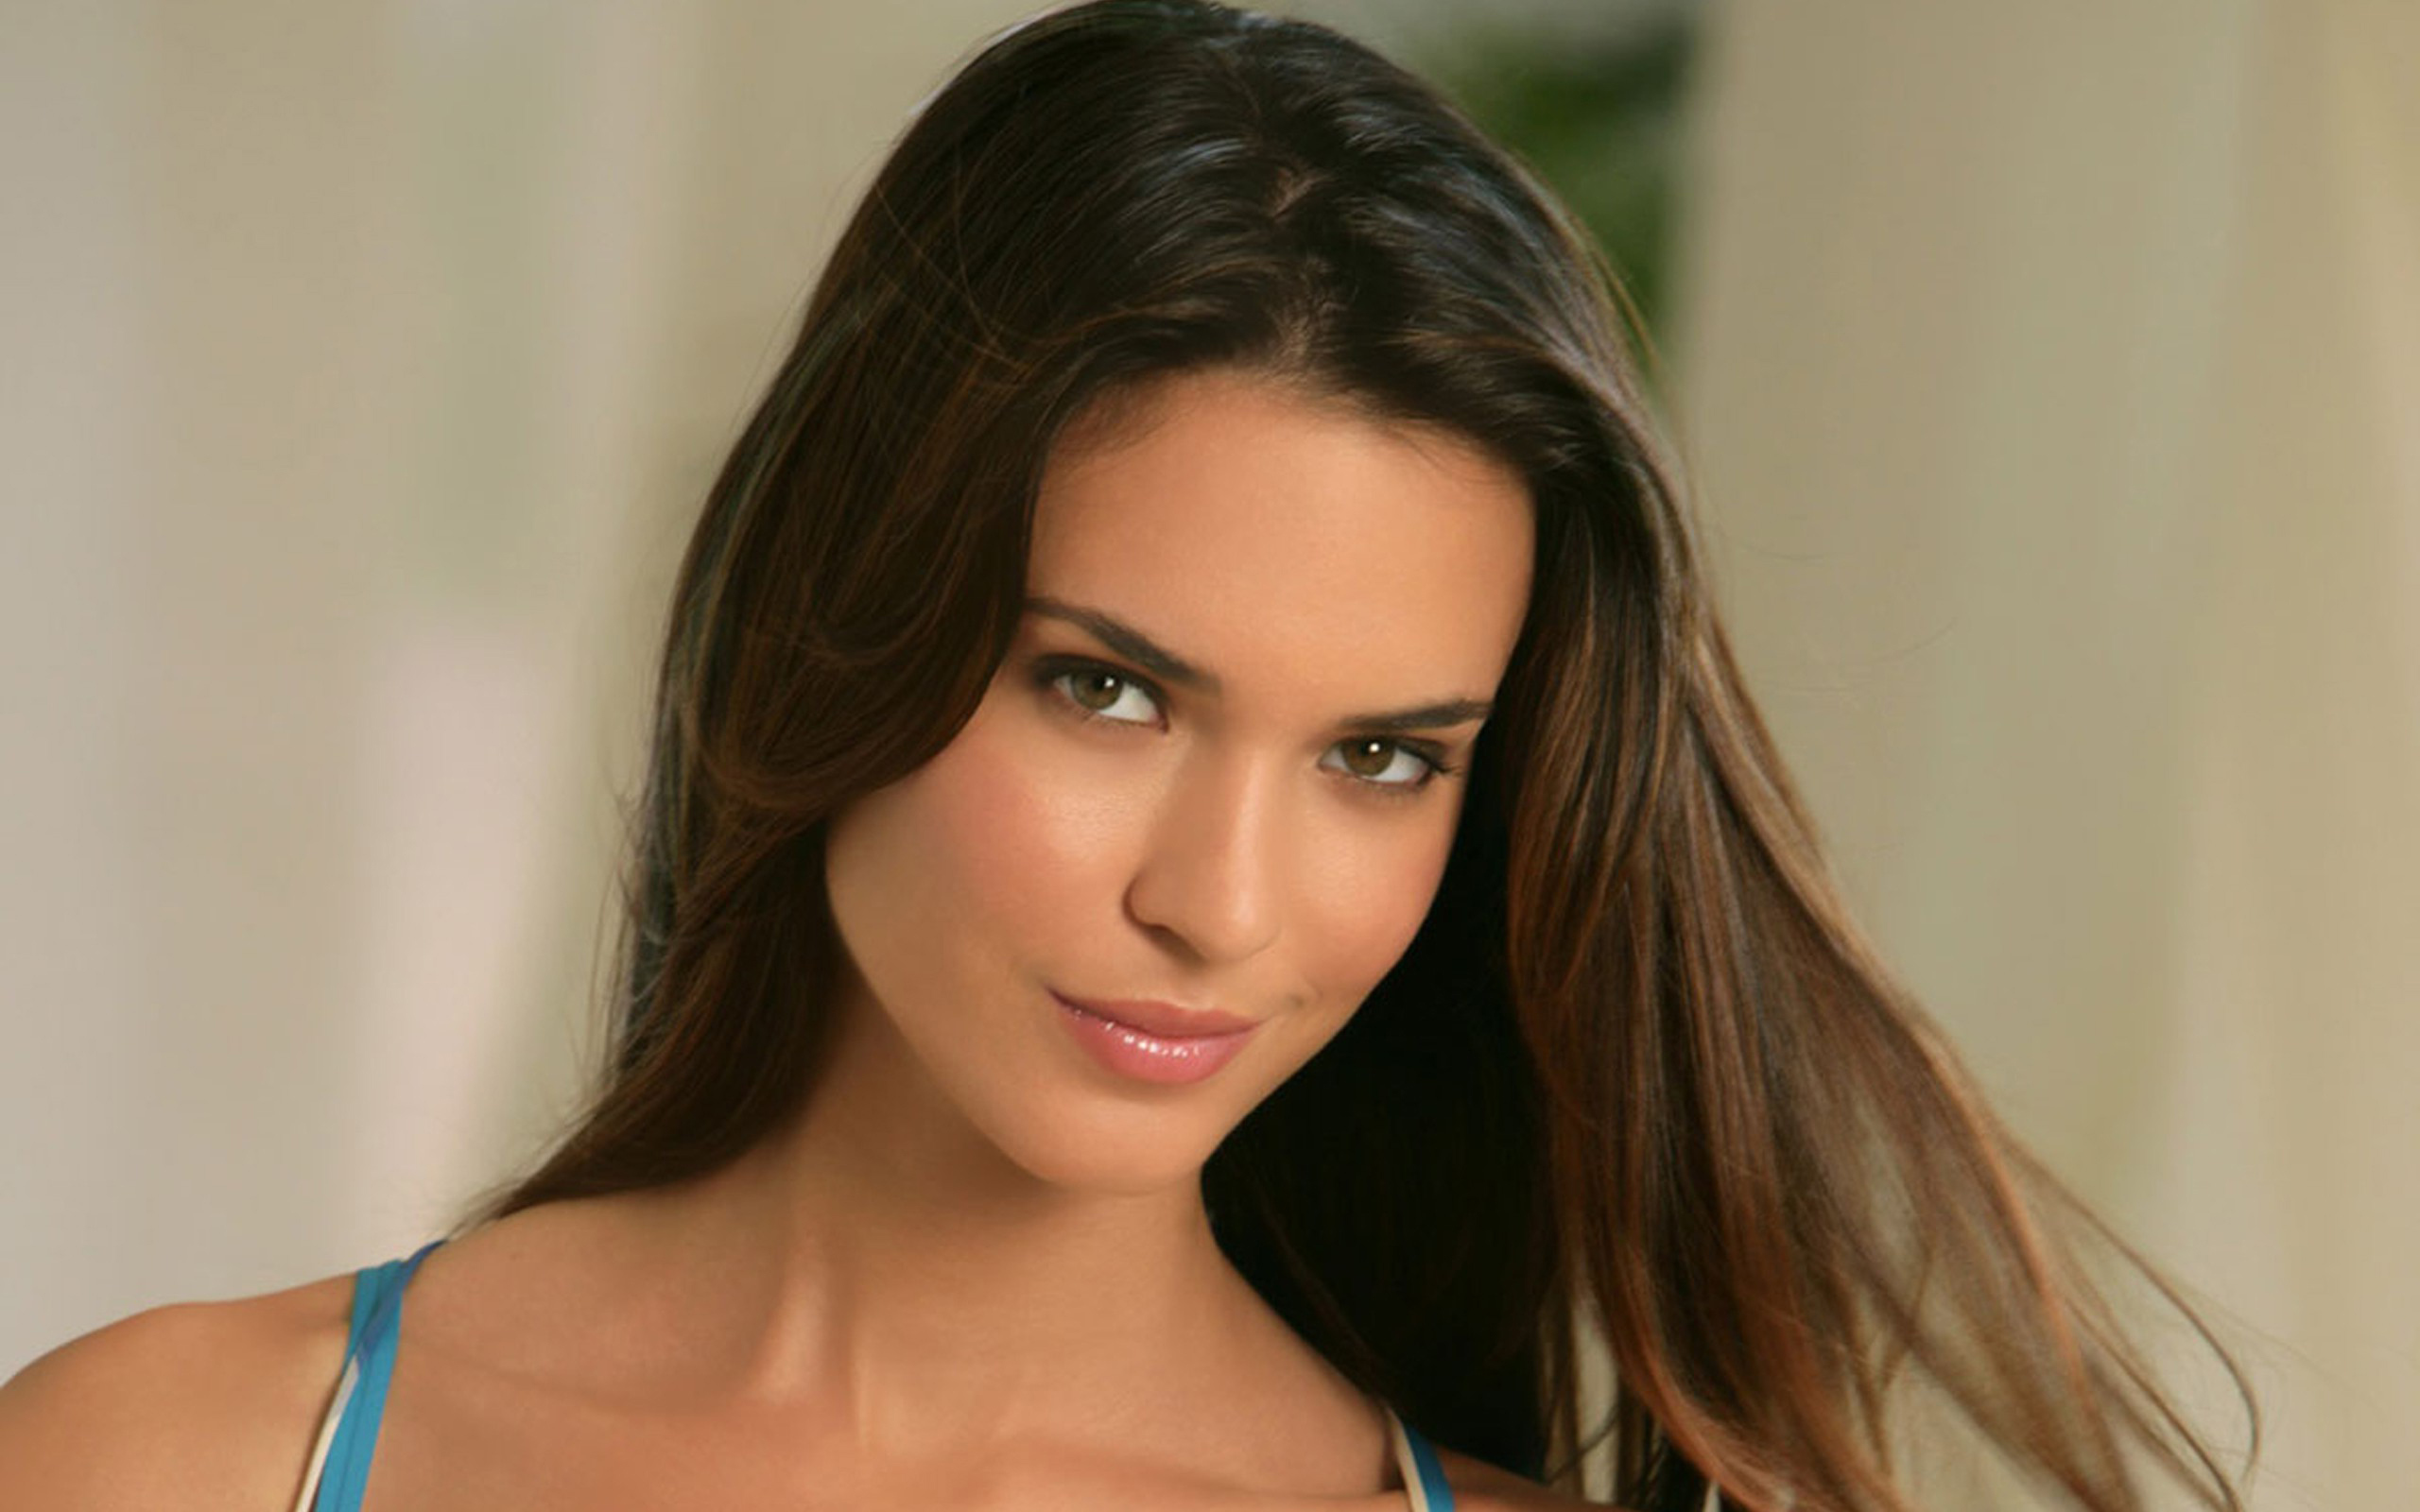 Odette Annable Wallpaper Image Photos Pictures Background